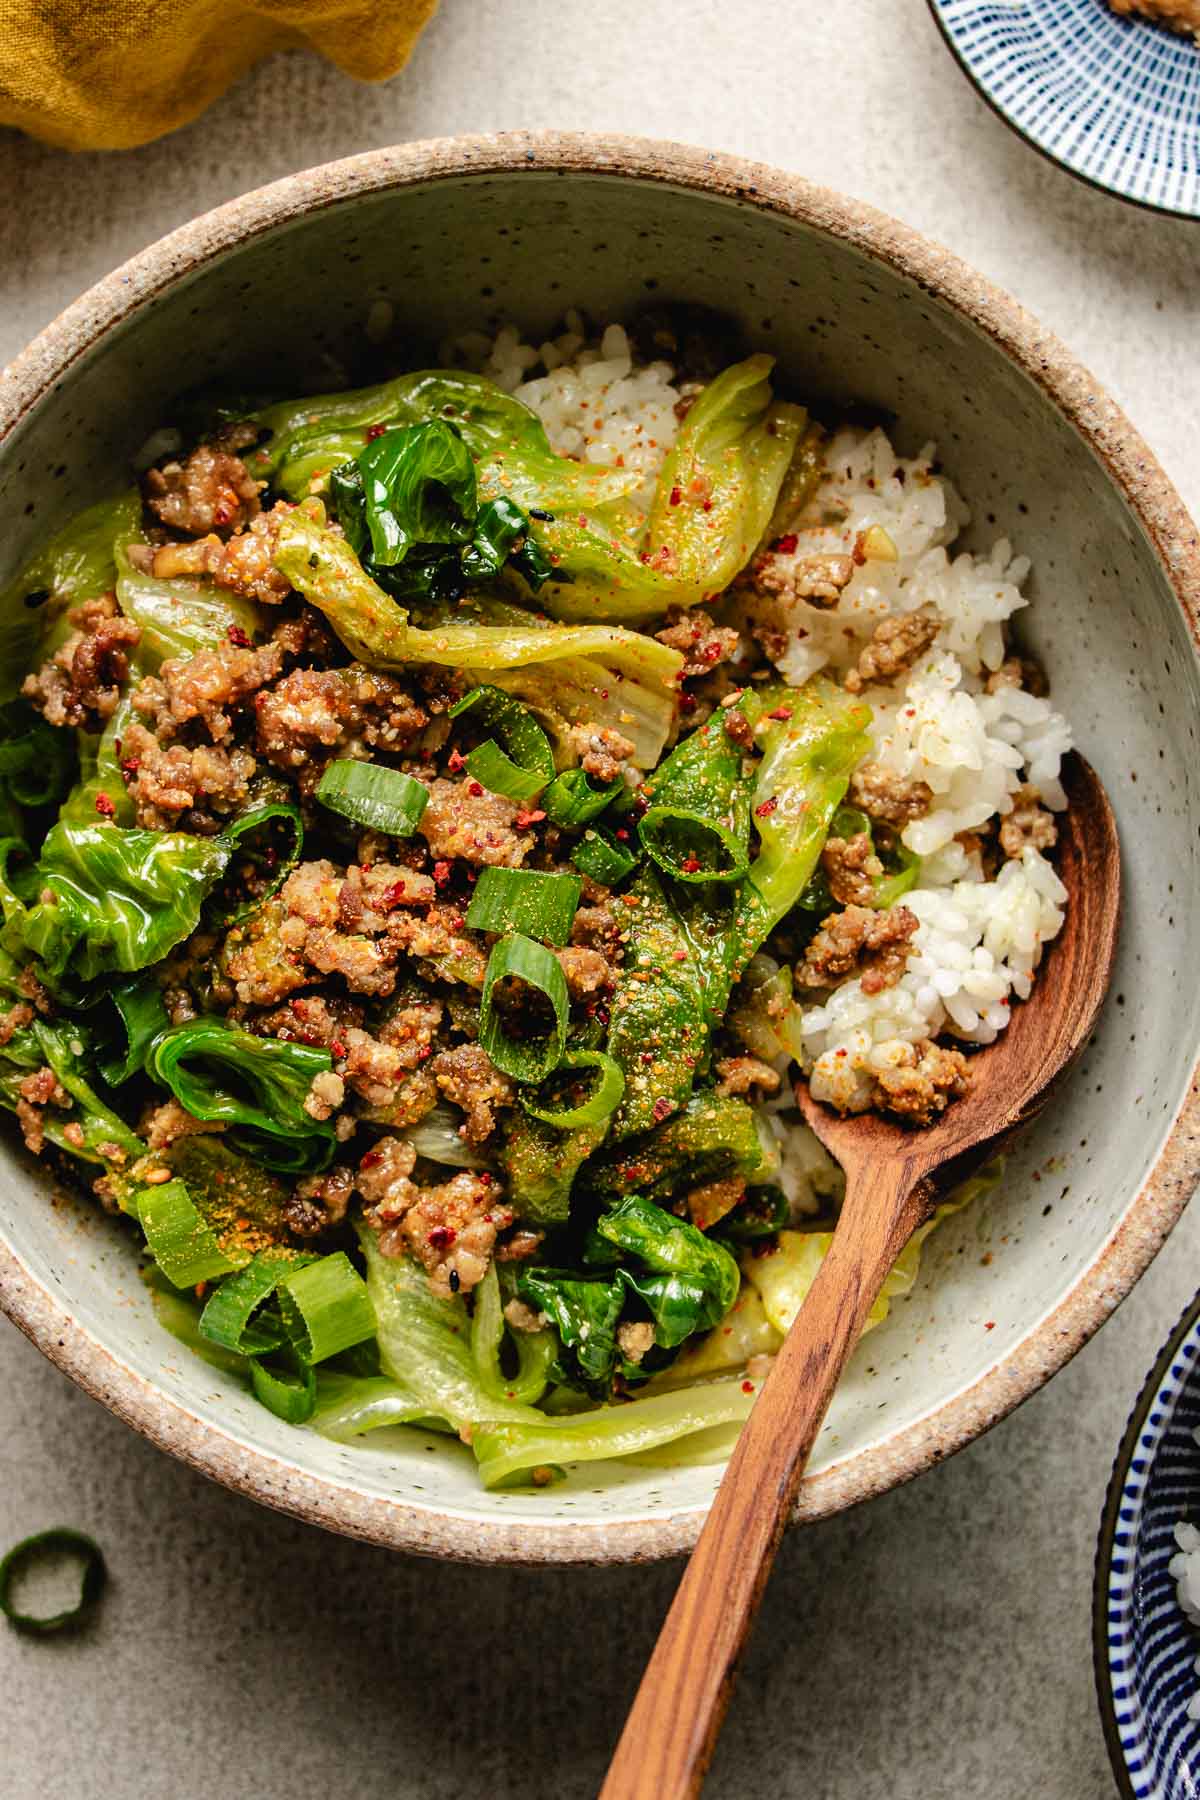 An overhead close shot image shows a bowl of delicious ground pork stir fry with miso sauce and crisp lettuce served over rice.